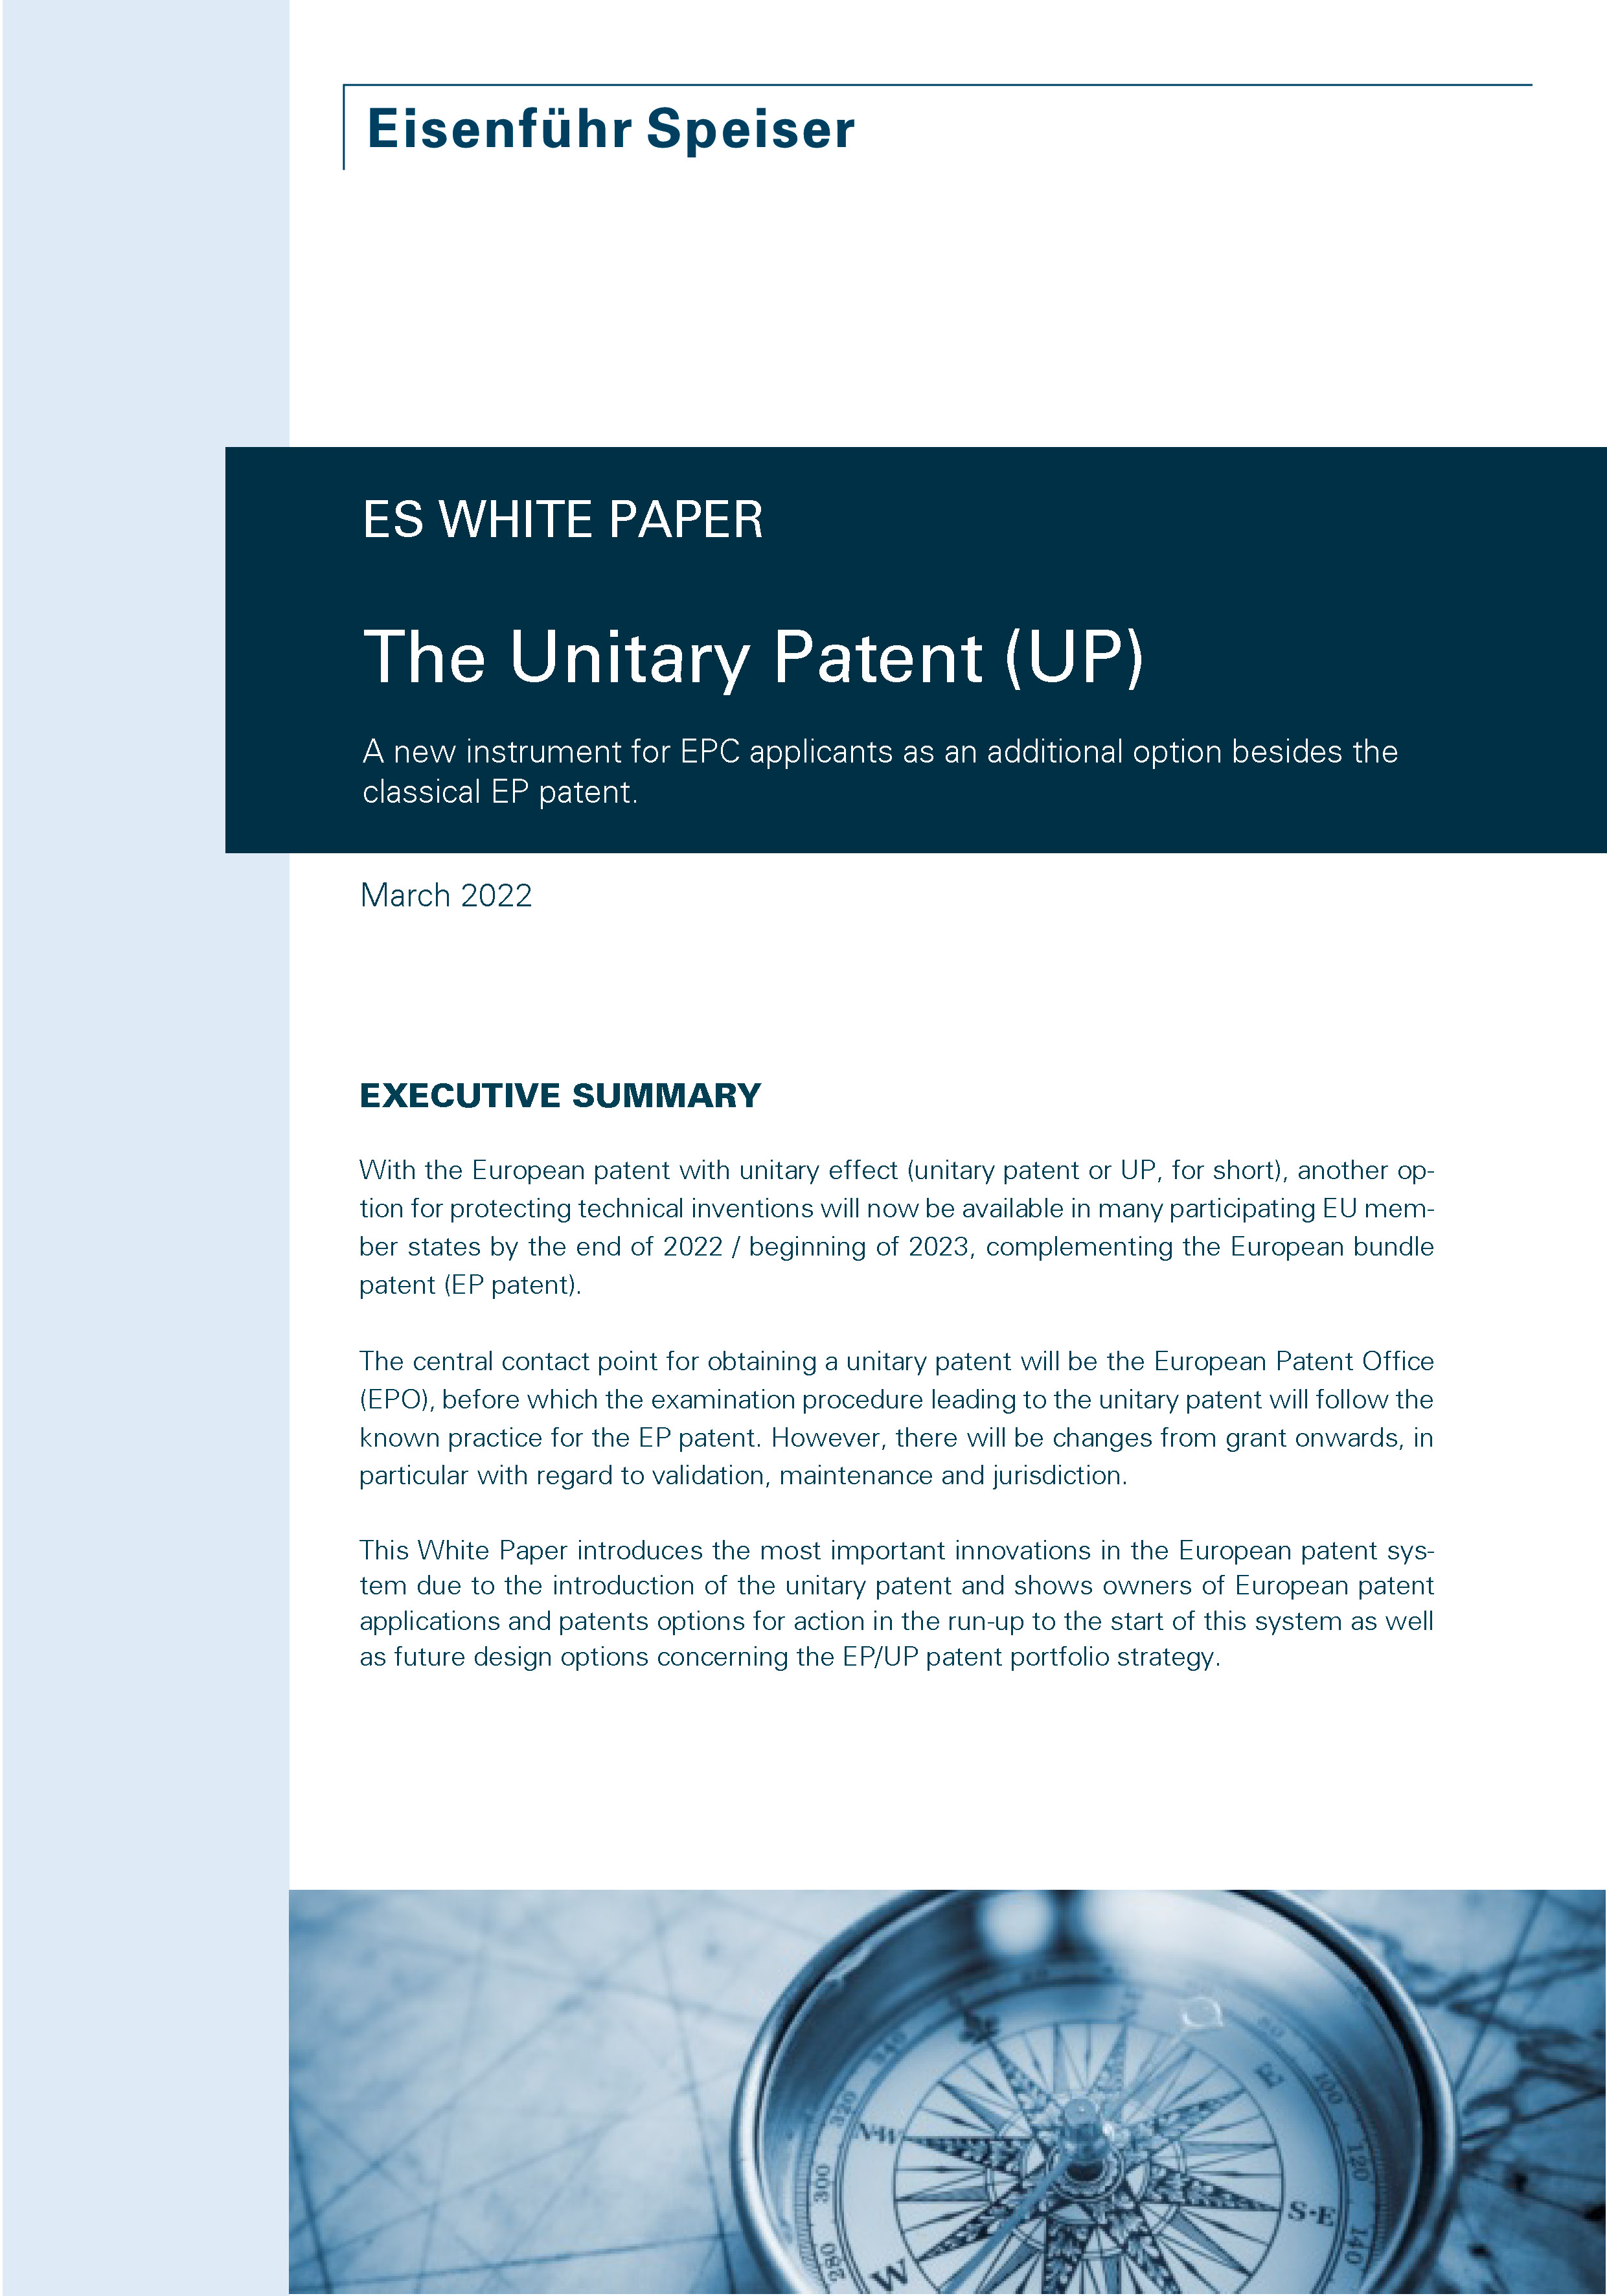 The Unitary Patent (UP)